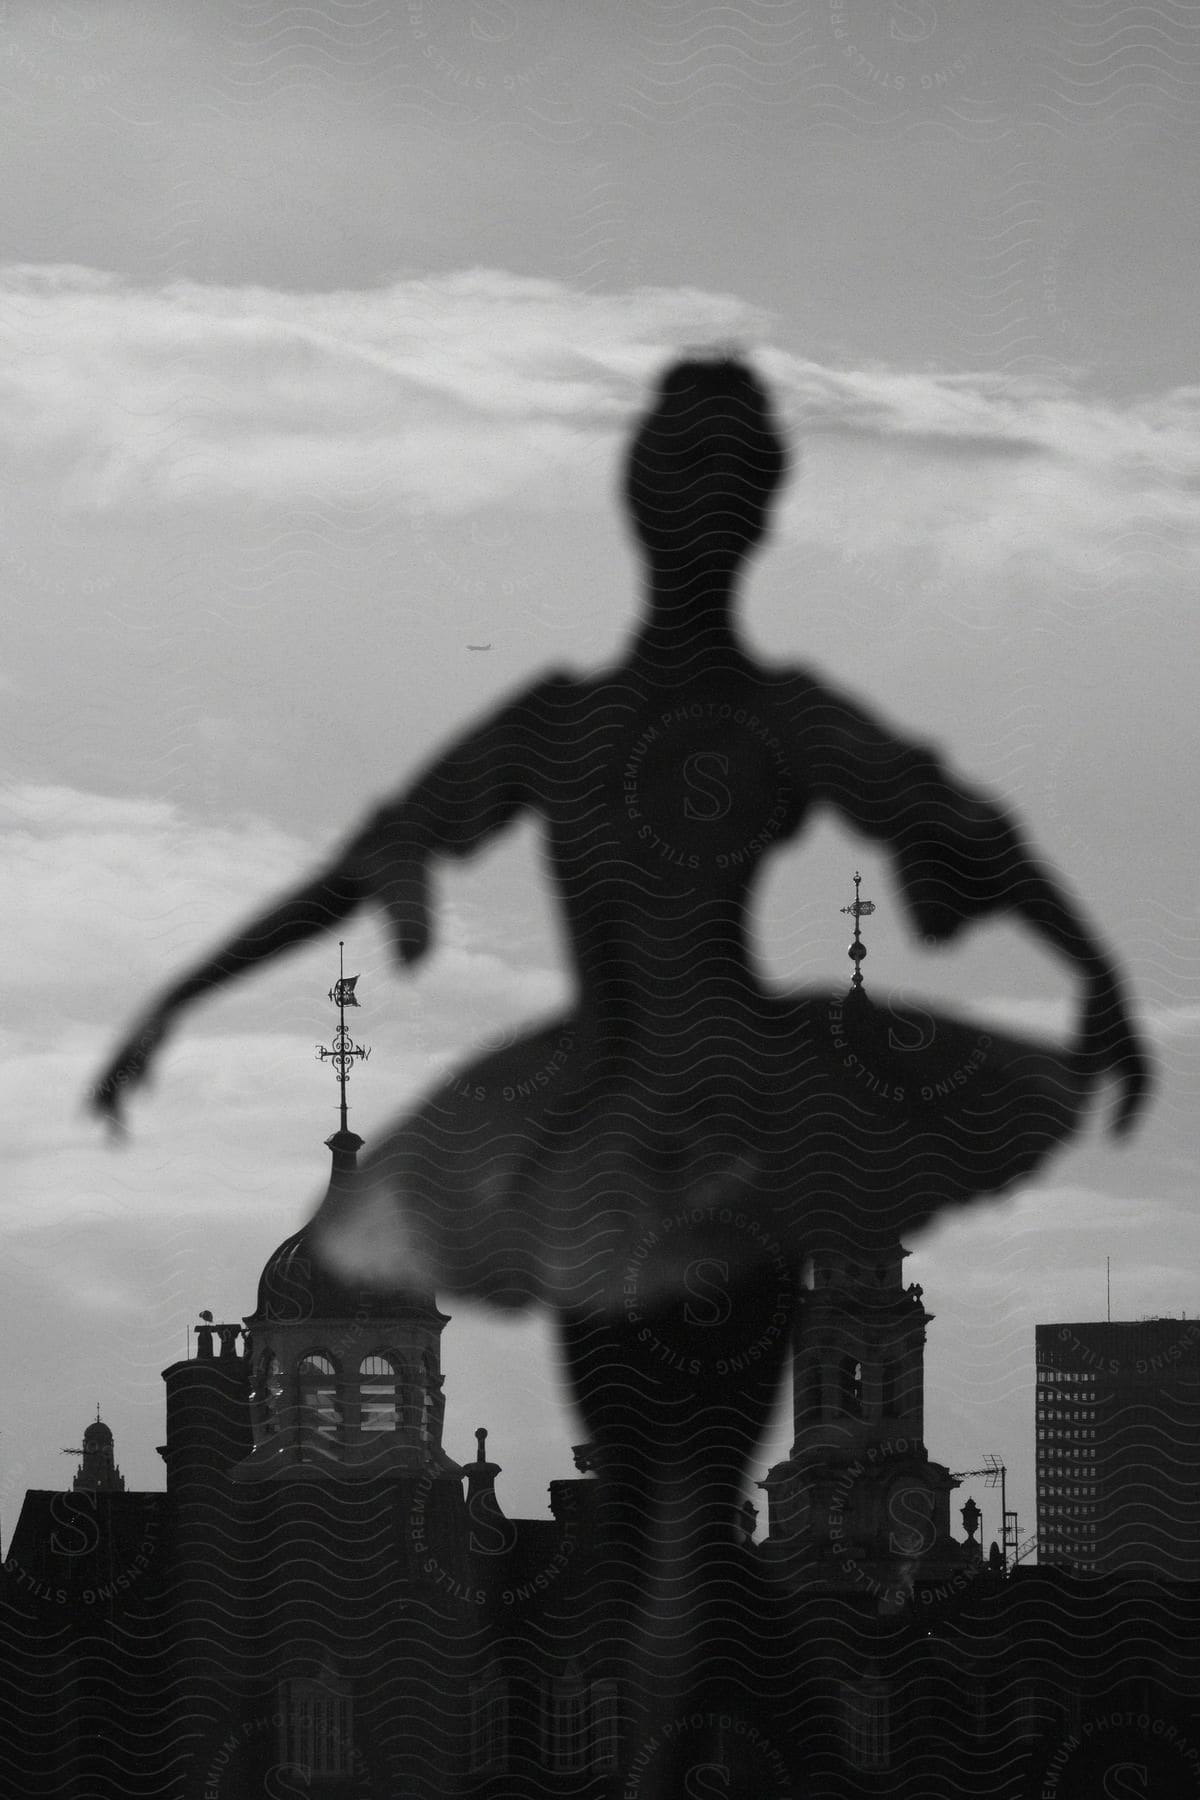 A dancer is performing a ballet move with the view of buildings.